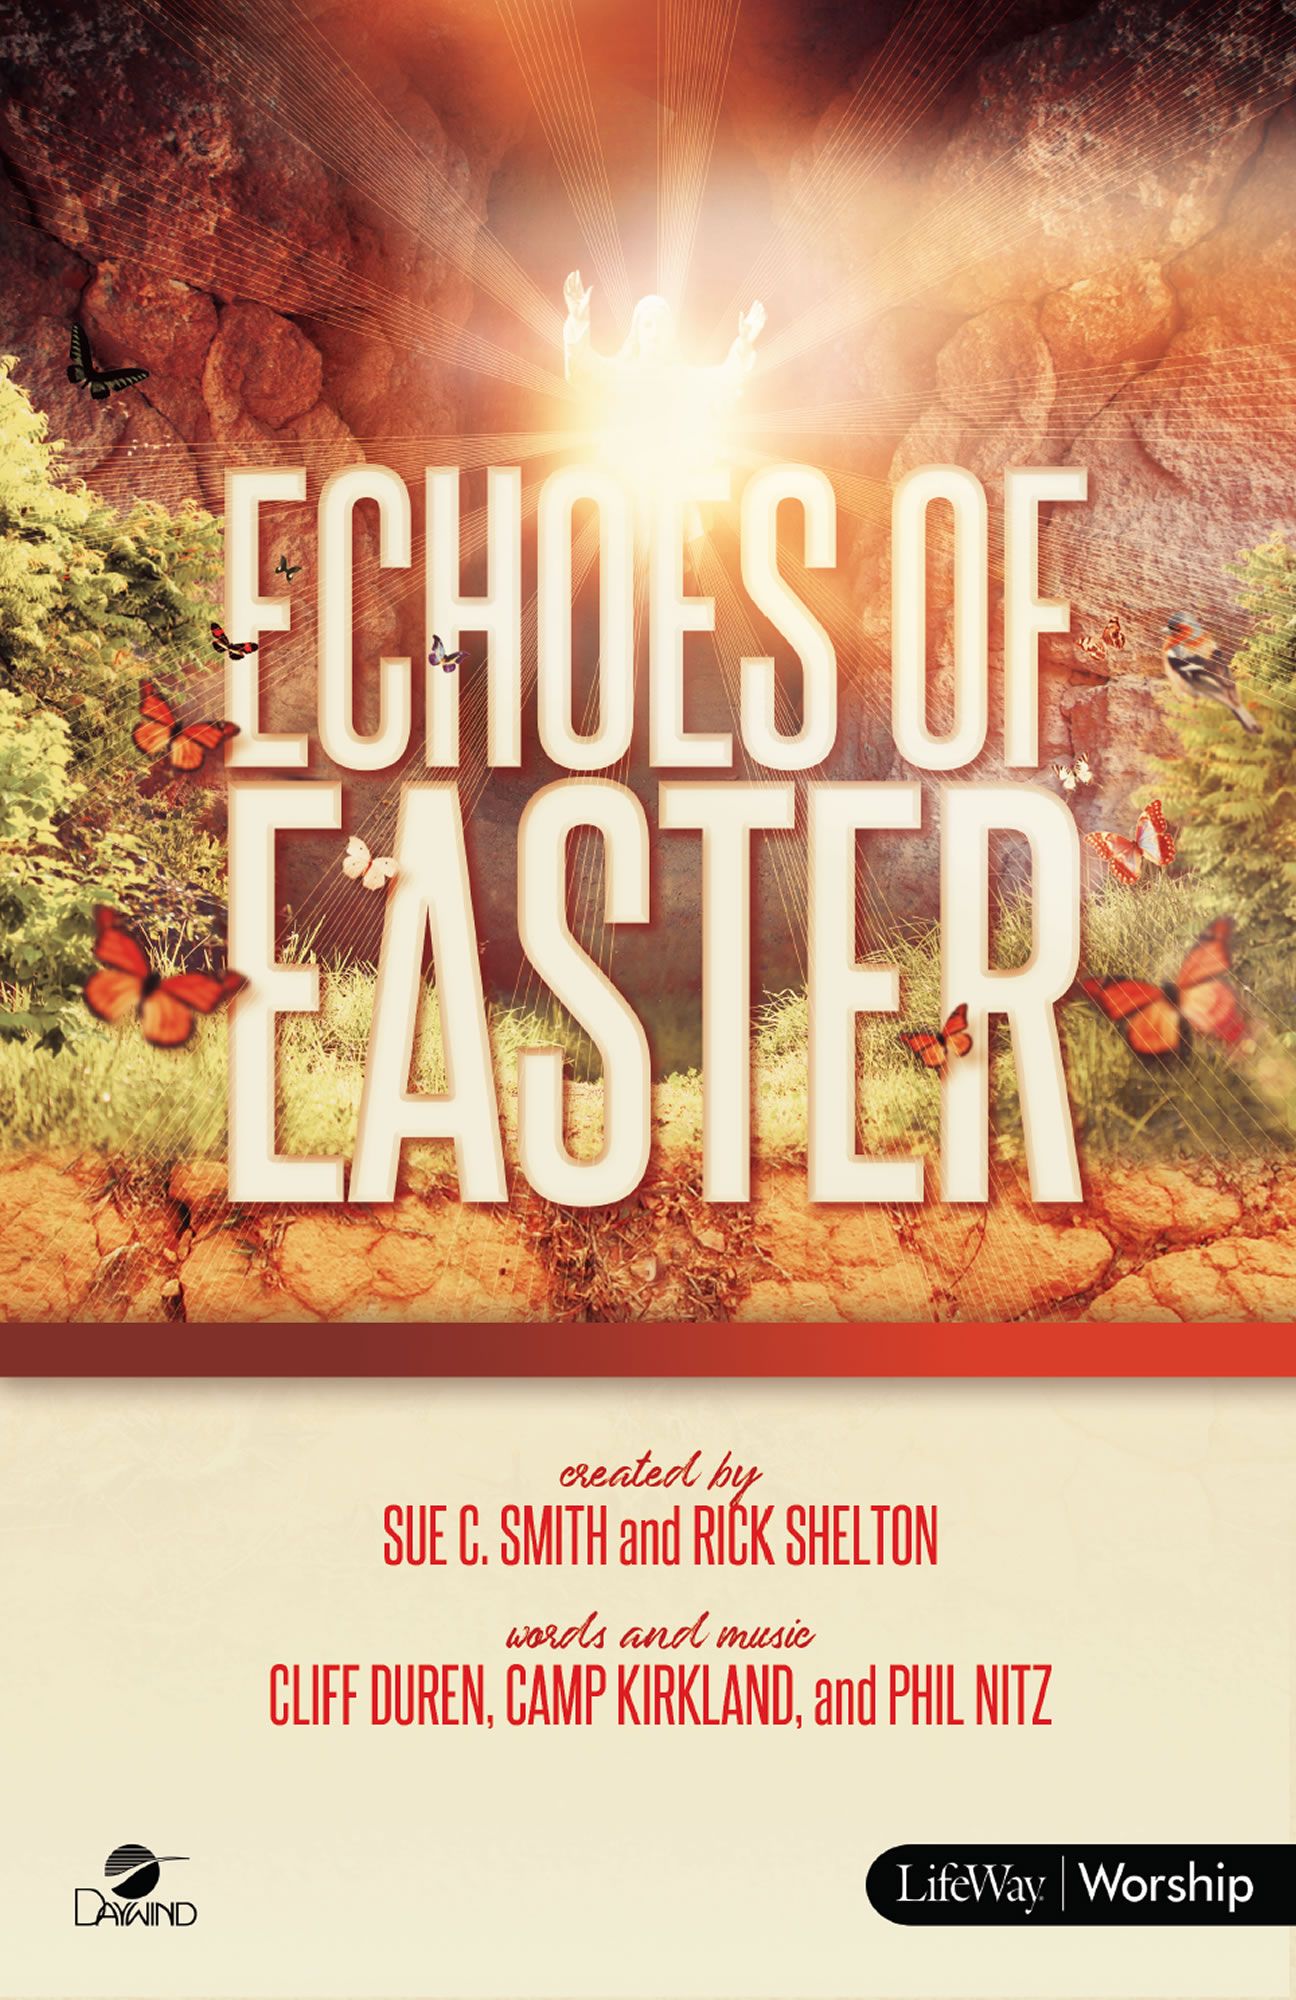 Echoes of Easter Daywind Musical